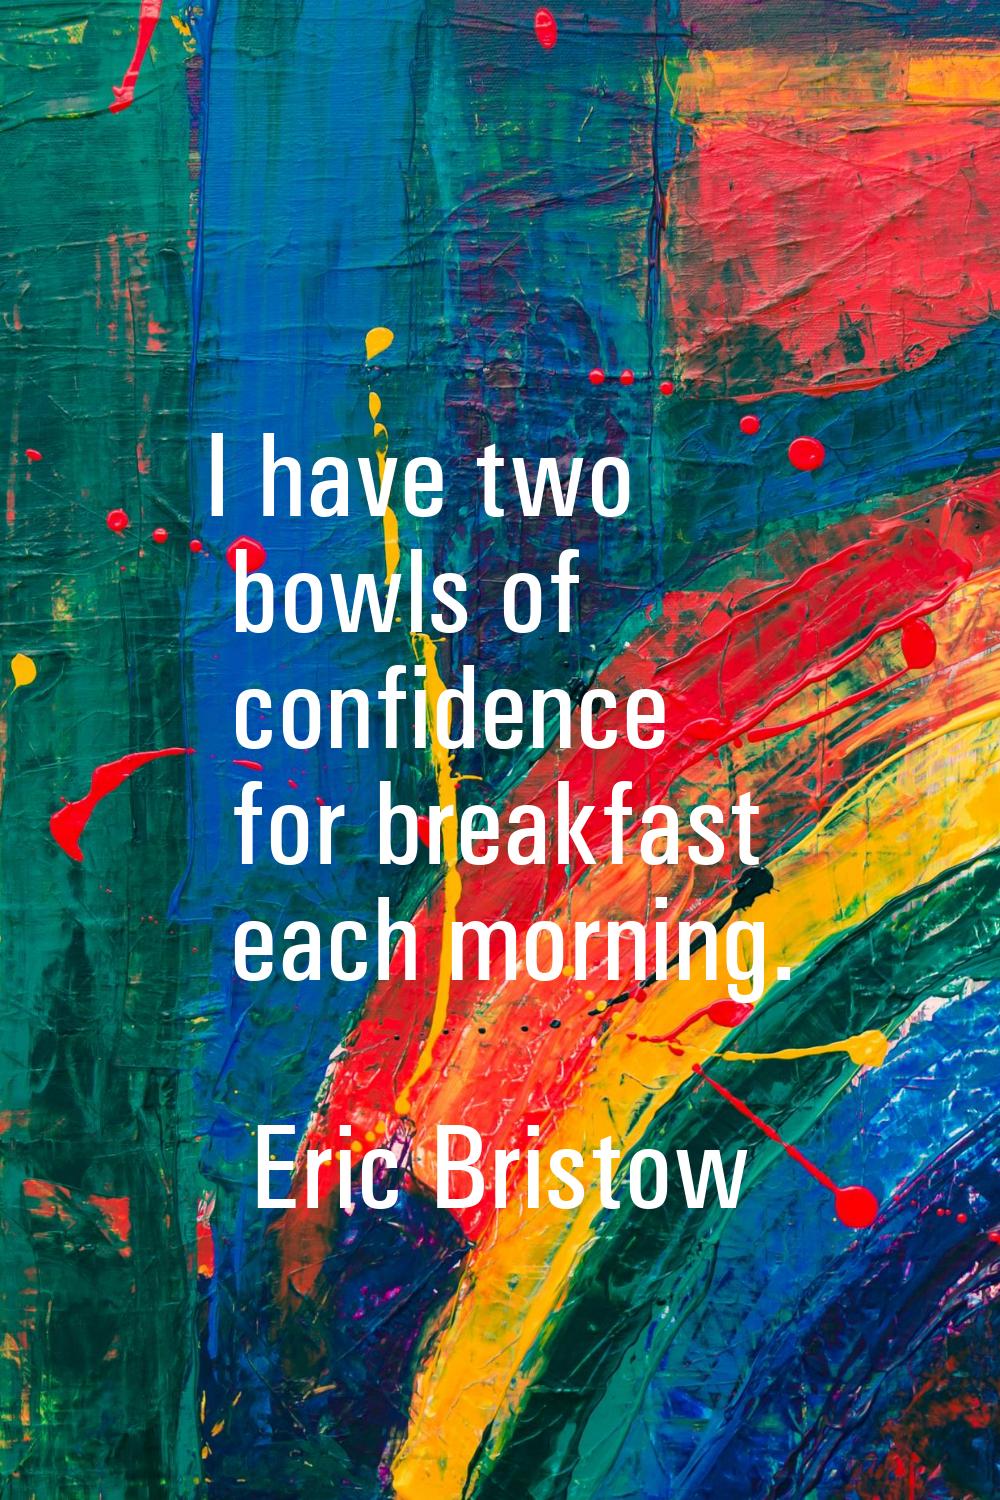 I have two bowls of confidence for breakfast each morning.